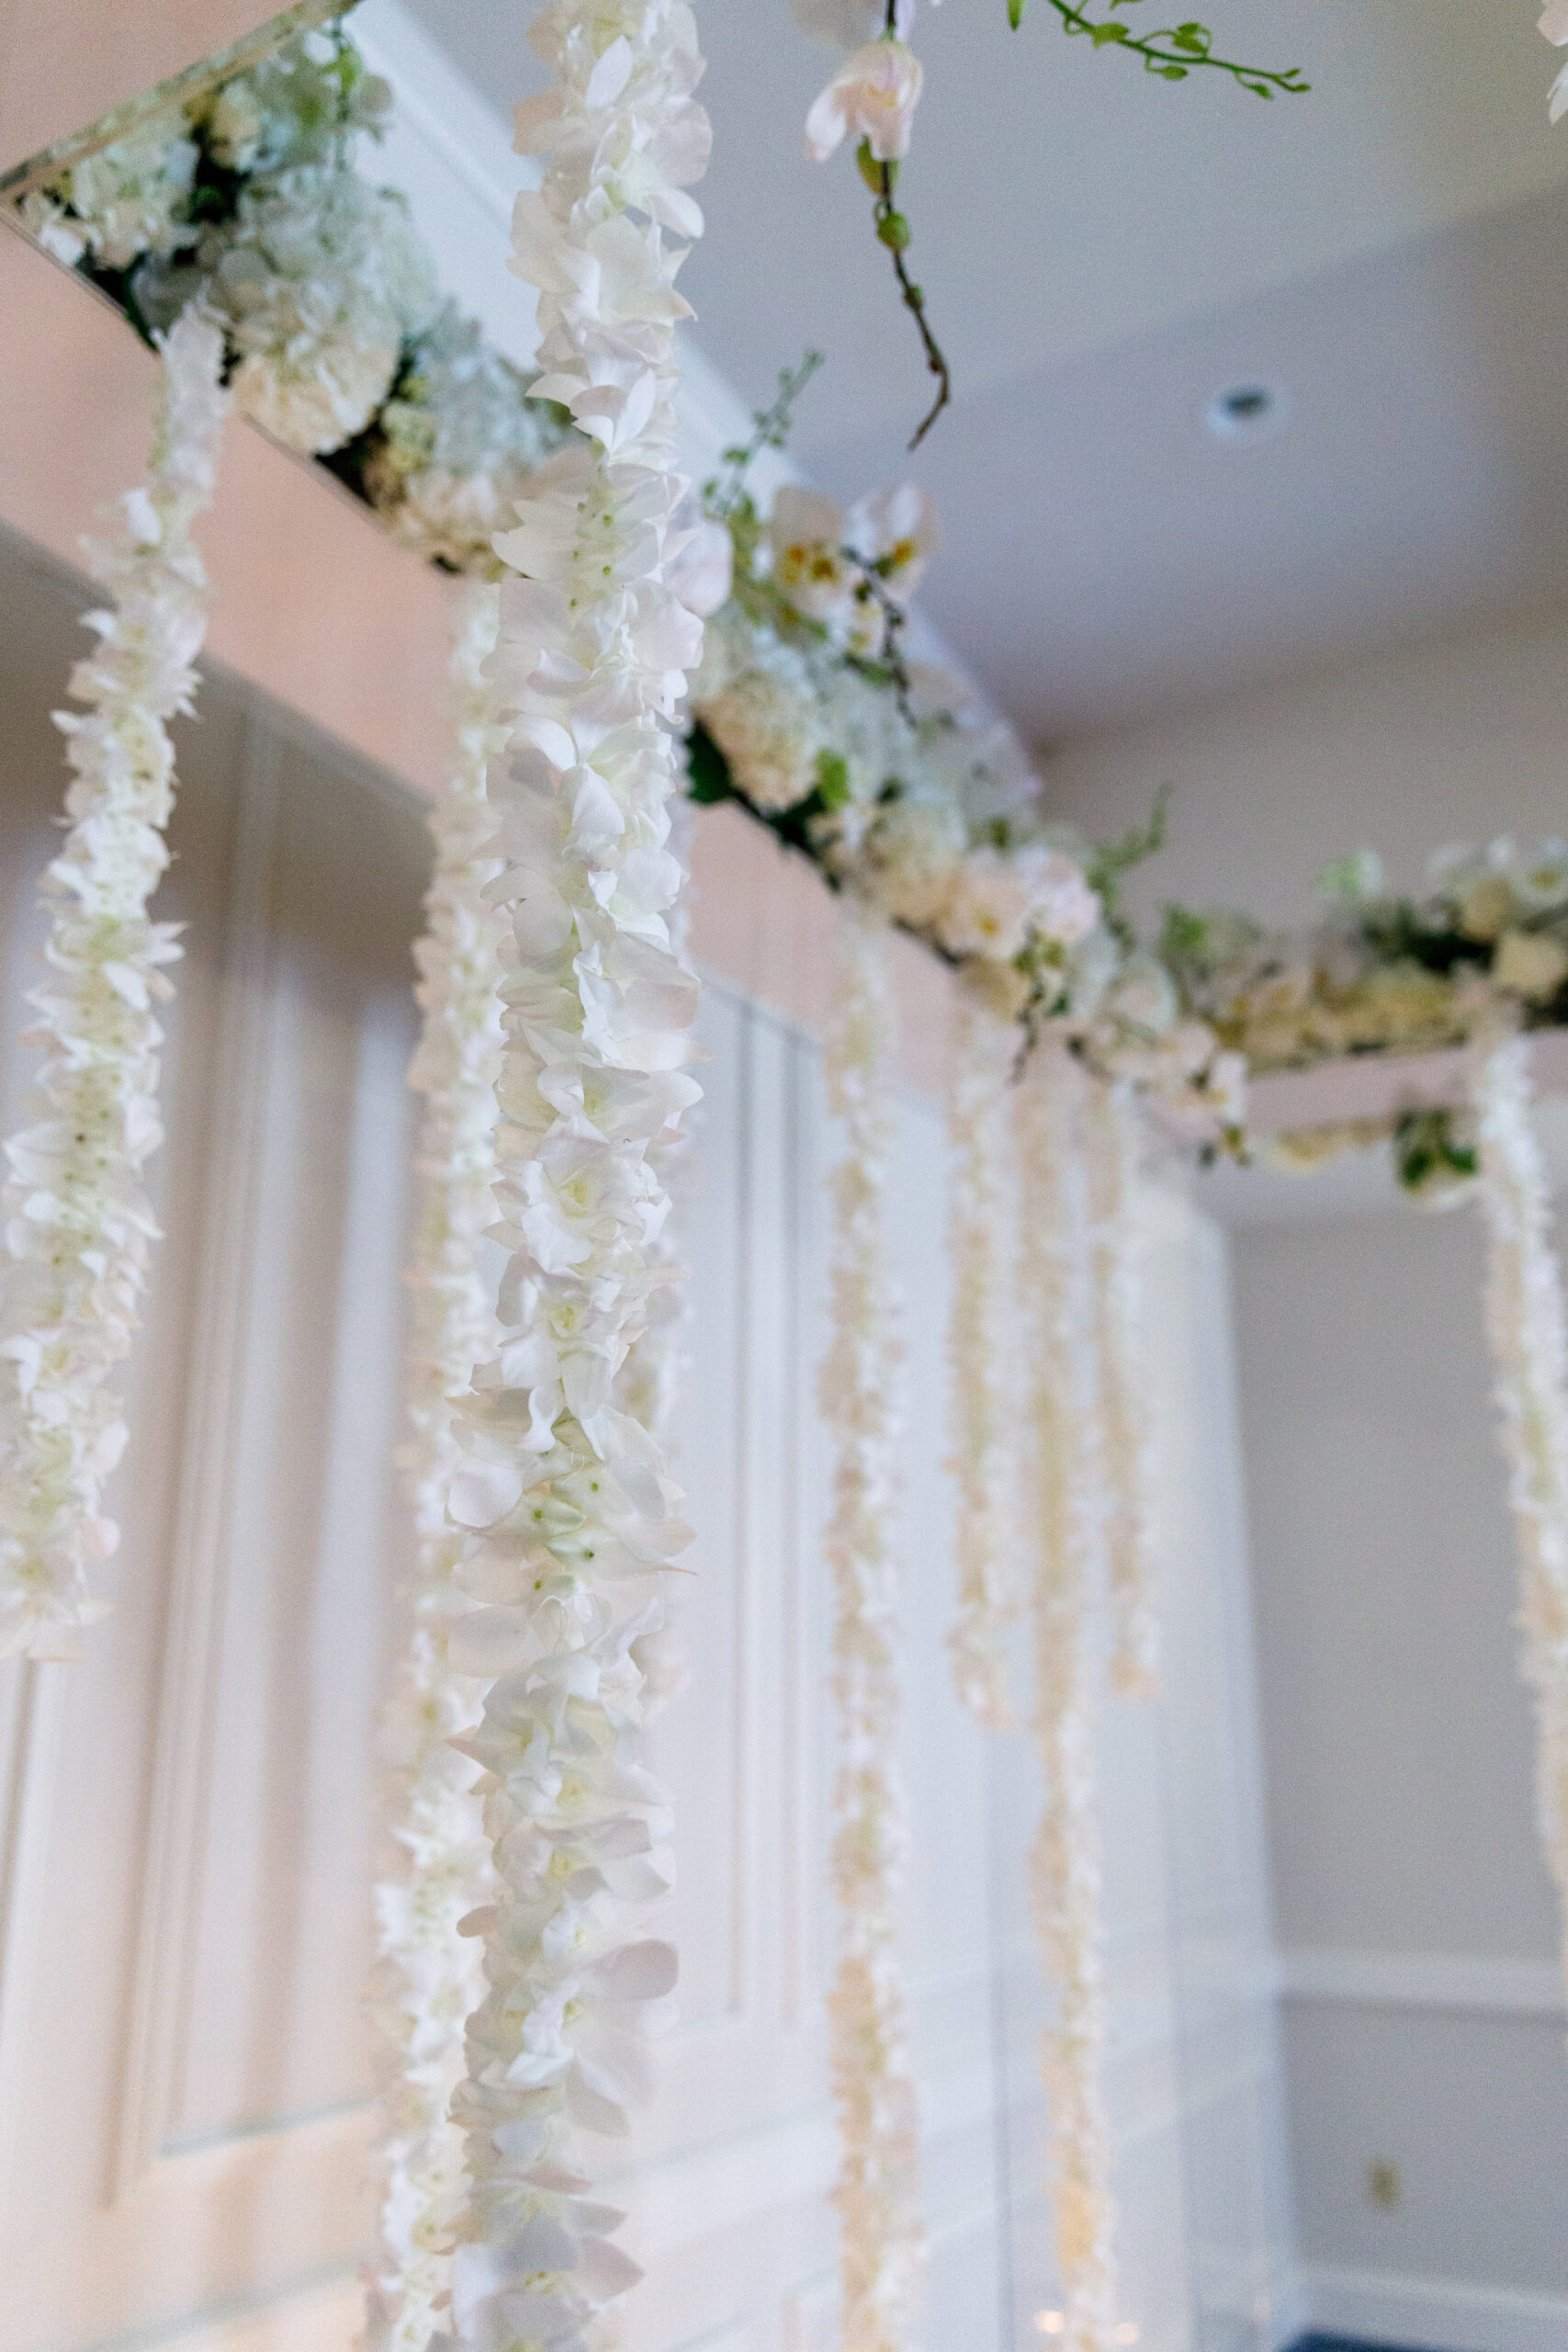 Acrylic Chuppah with Orchids and Cascading Wisteria | Jewish Wedding Traditions Inspiration